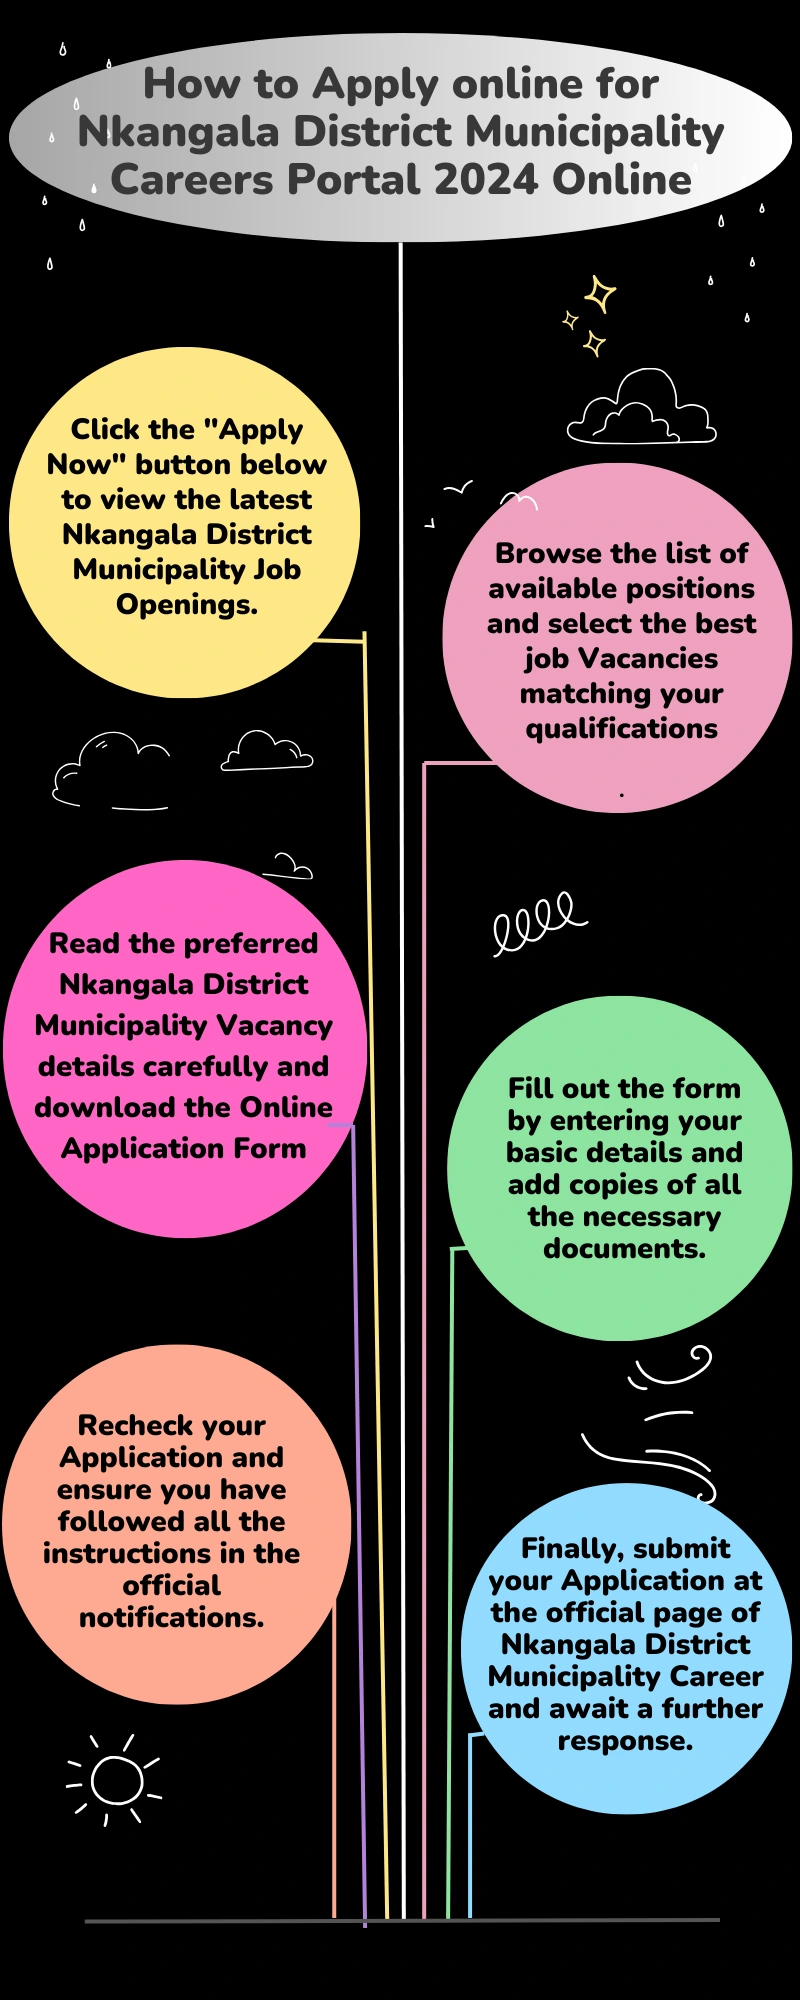 How to Apply online for Nkangala District Municipality Careers Portal 2024 Online